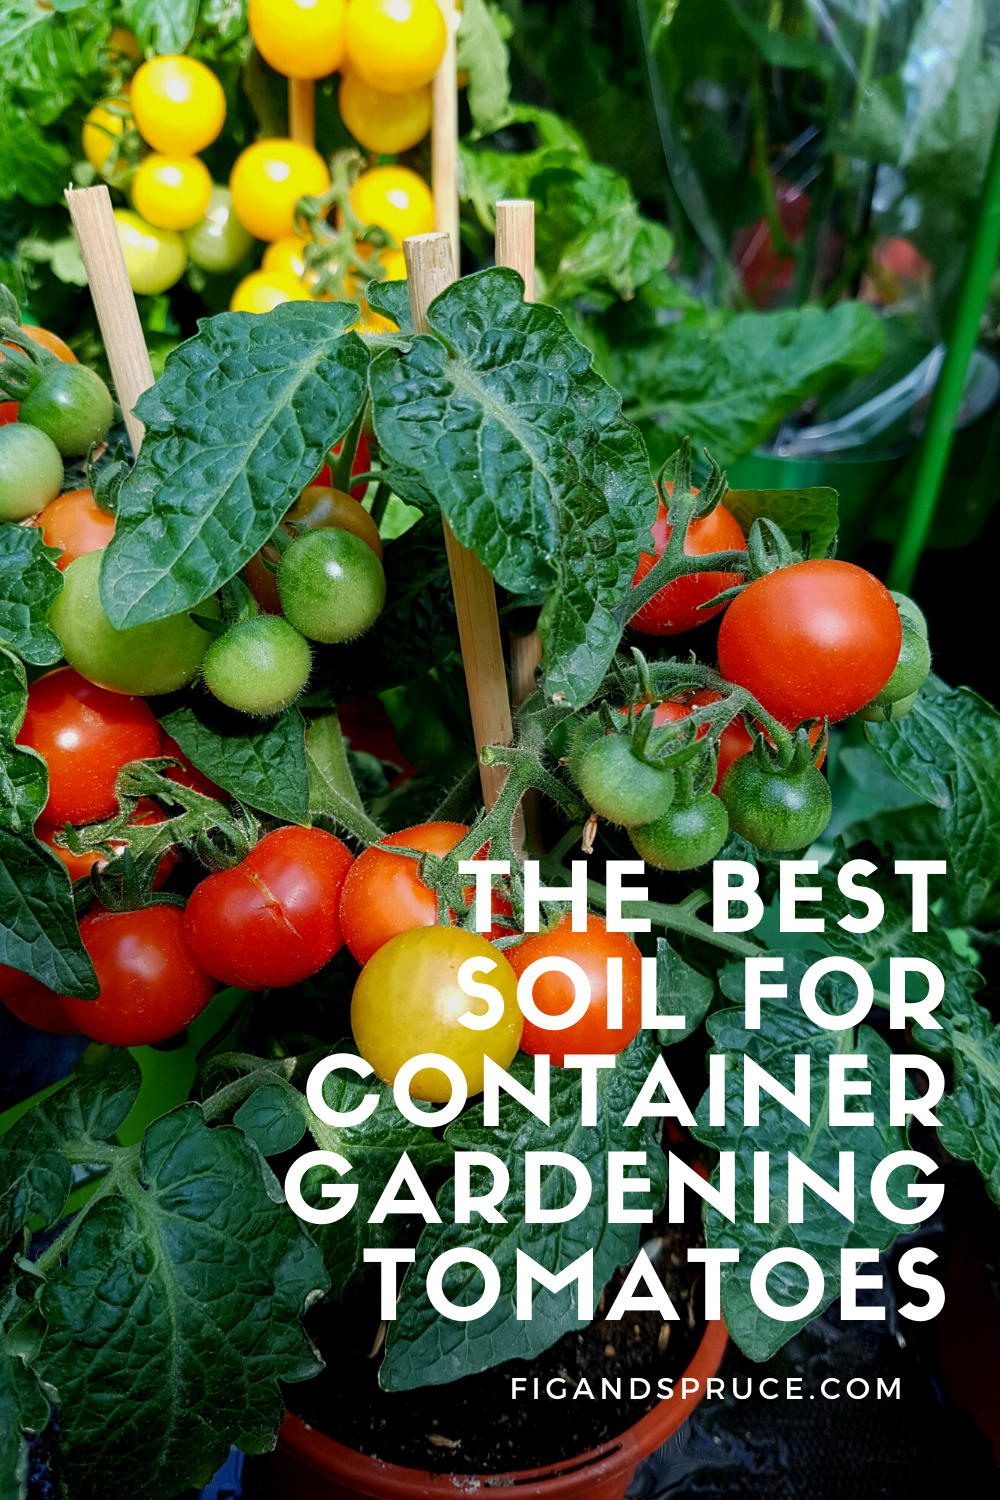 The Best Soil for Container Garden Tomatoes